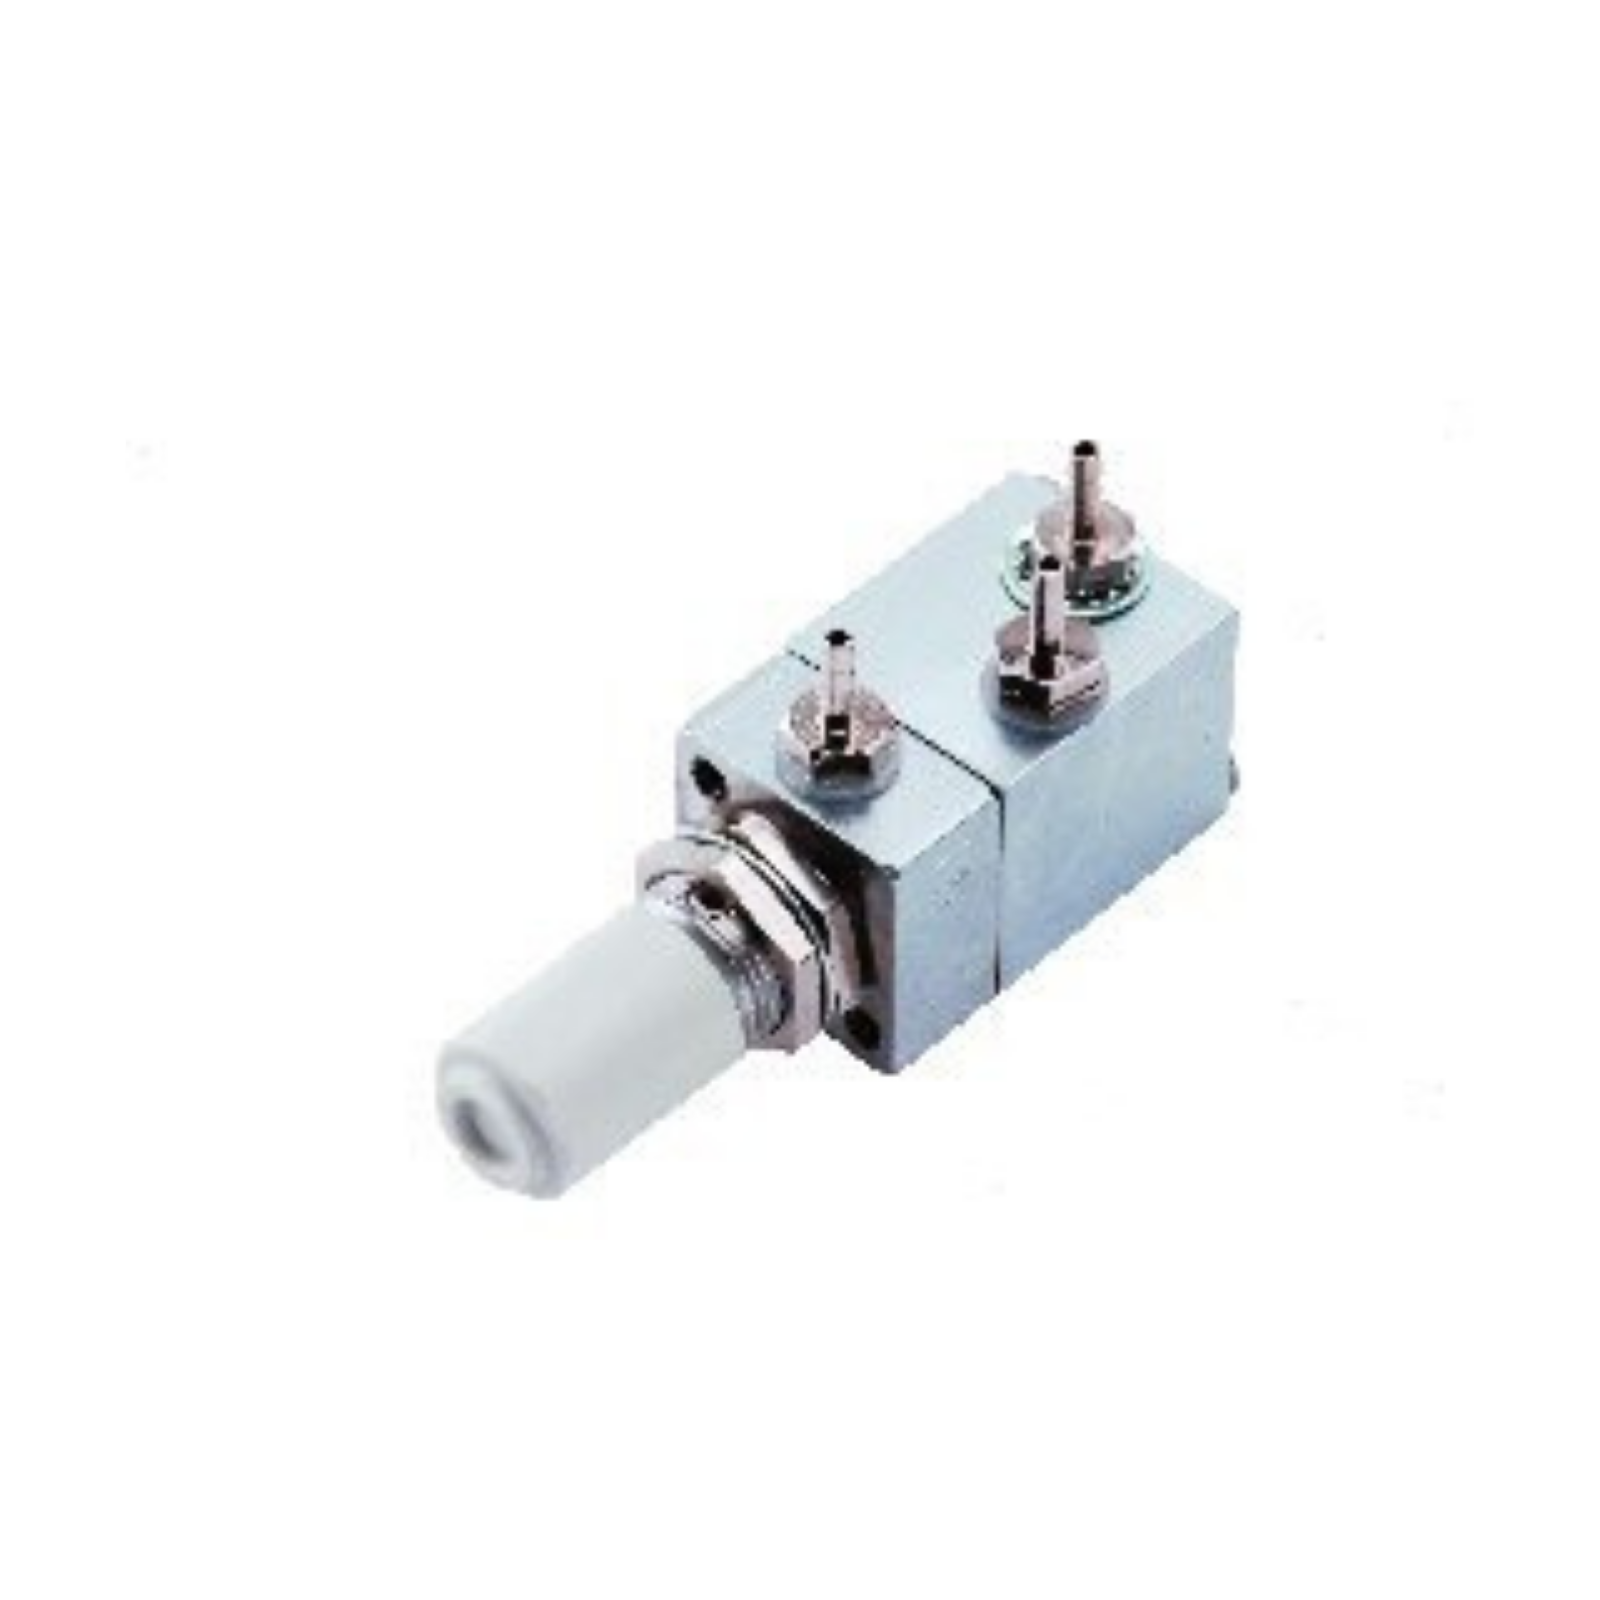 Parts Pelton & Crane Water Relay with Flow Control